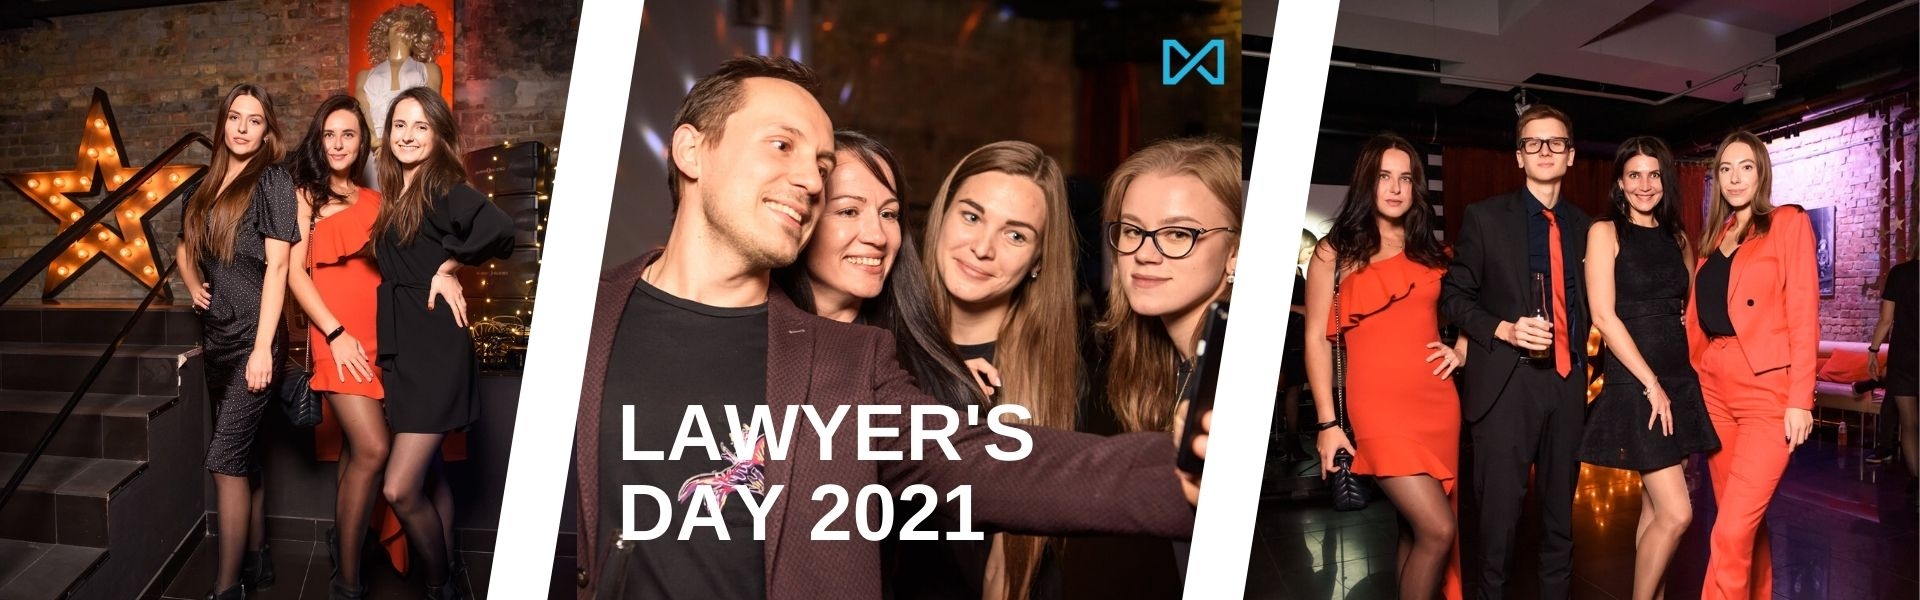 Lawyer's Day at EVERLEGAL 2021